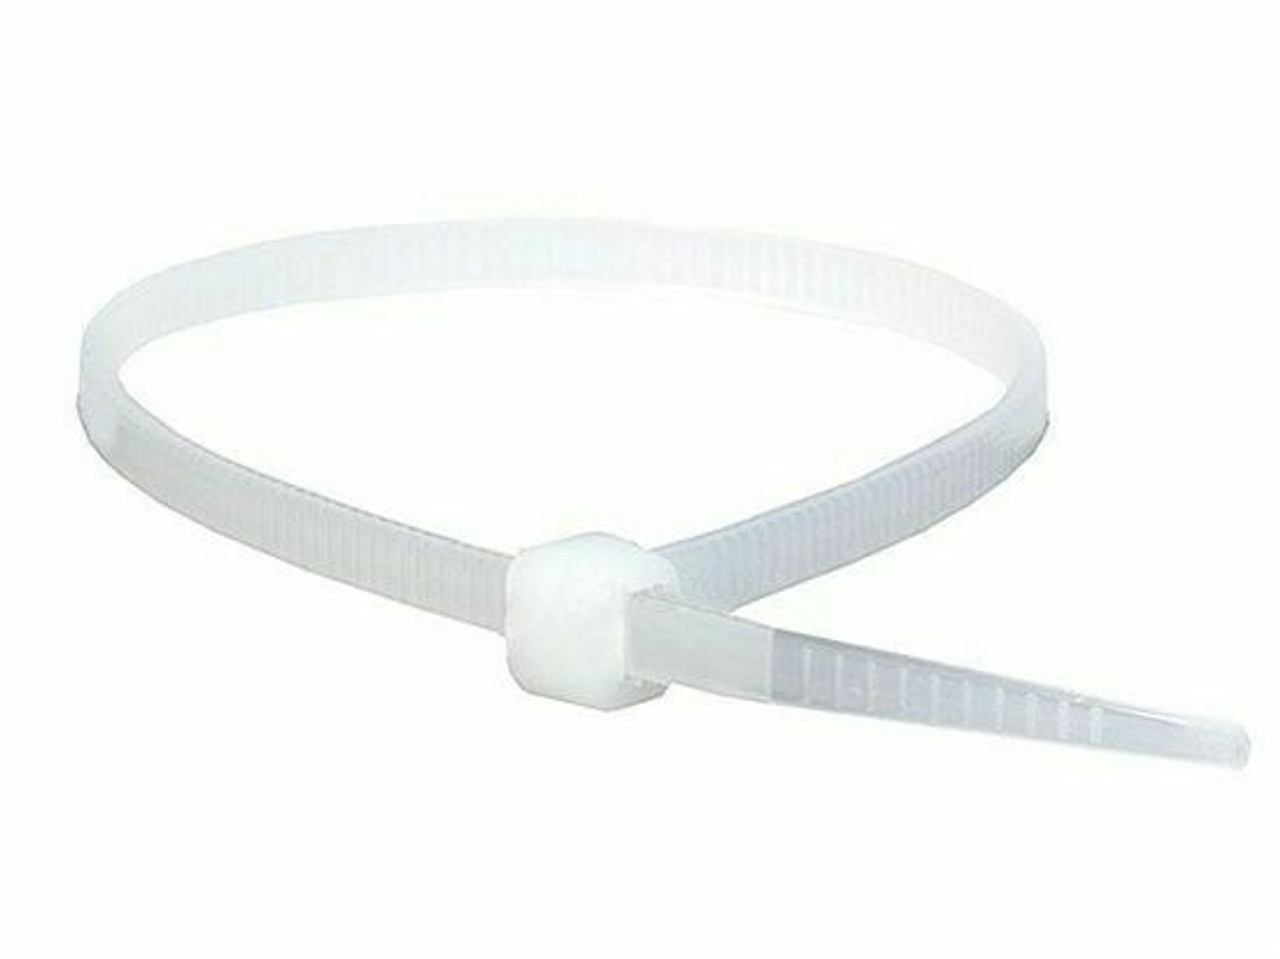 Eagle 4" Inch Cable Ties 100 Pack Clear 18 Lb Self-Locking Zip Nylon Cable Wire Ties Quick Bundle Easy Lock Straps Telephone Cat 5e Data Line Organizer